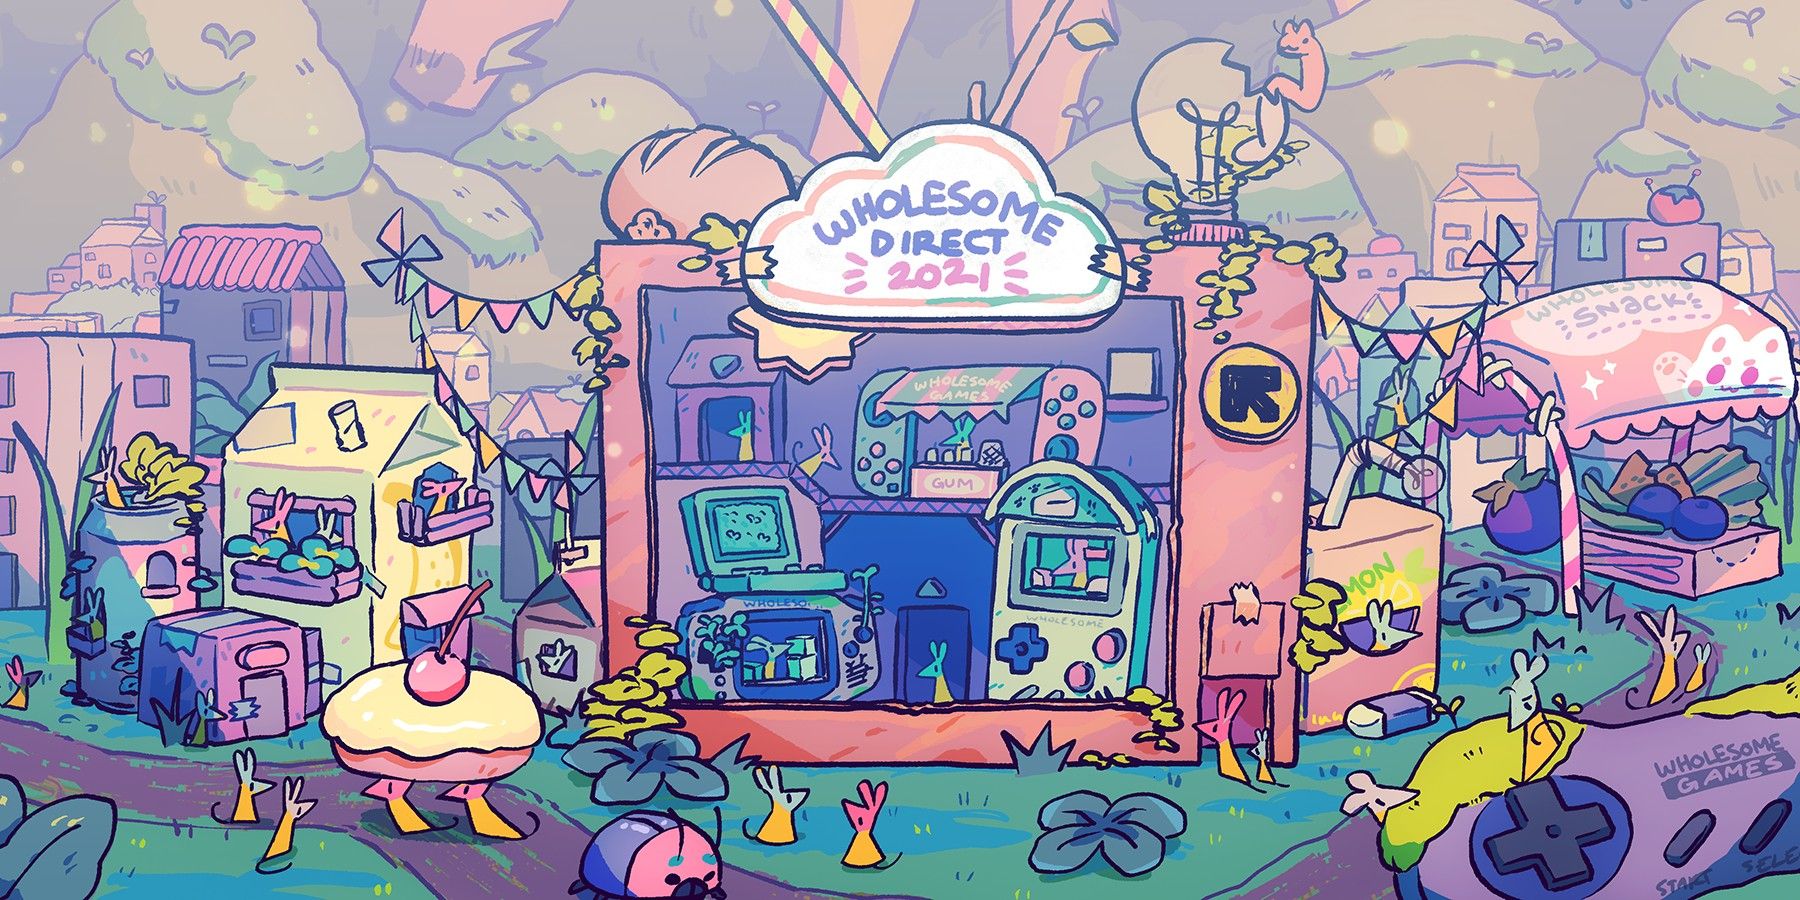 Best Indie Game Reveals From E3s Wholesome Direct